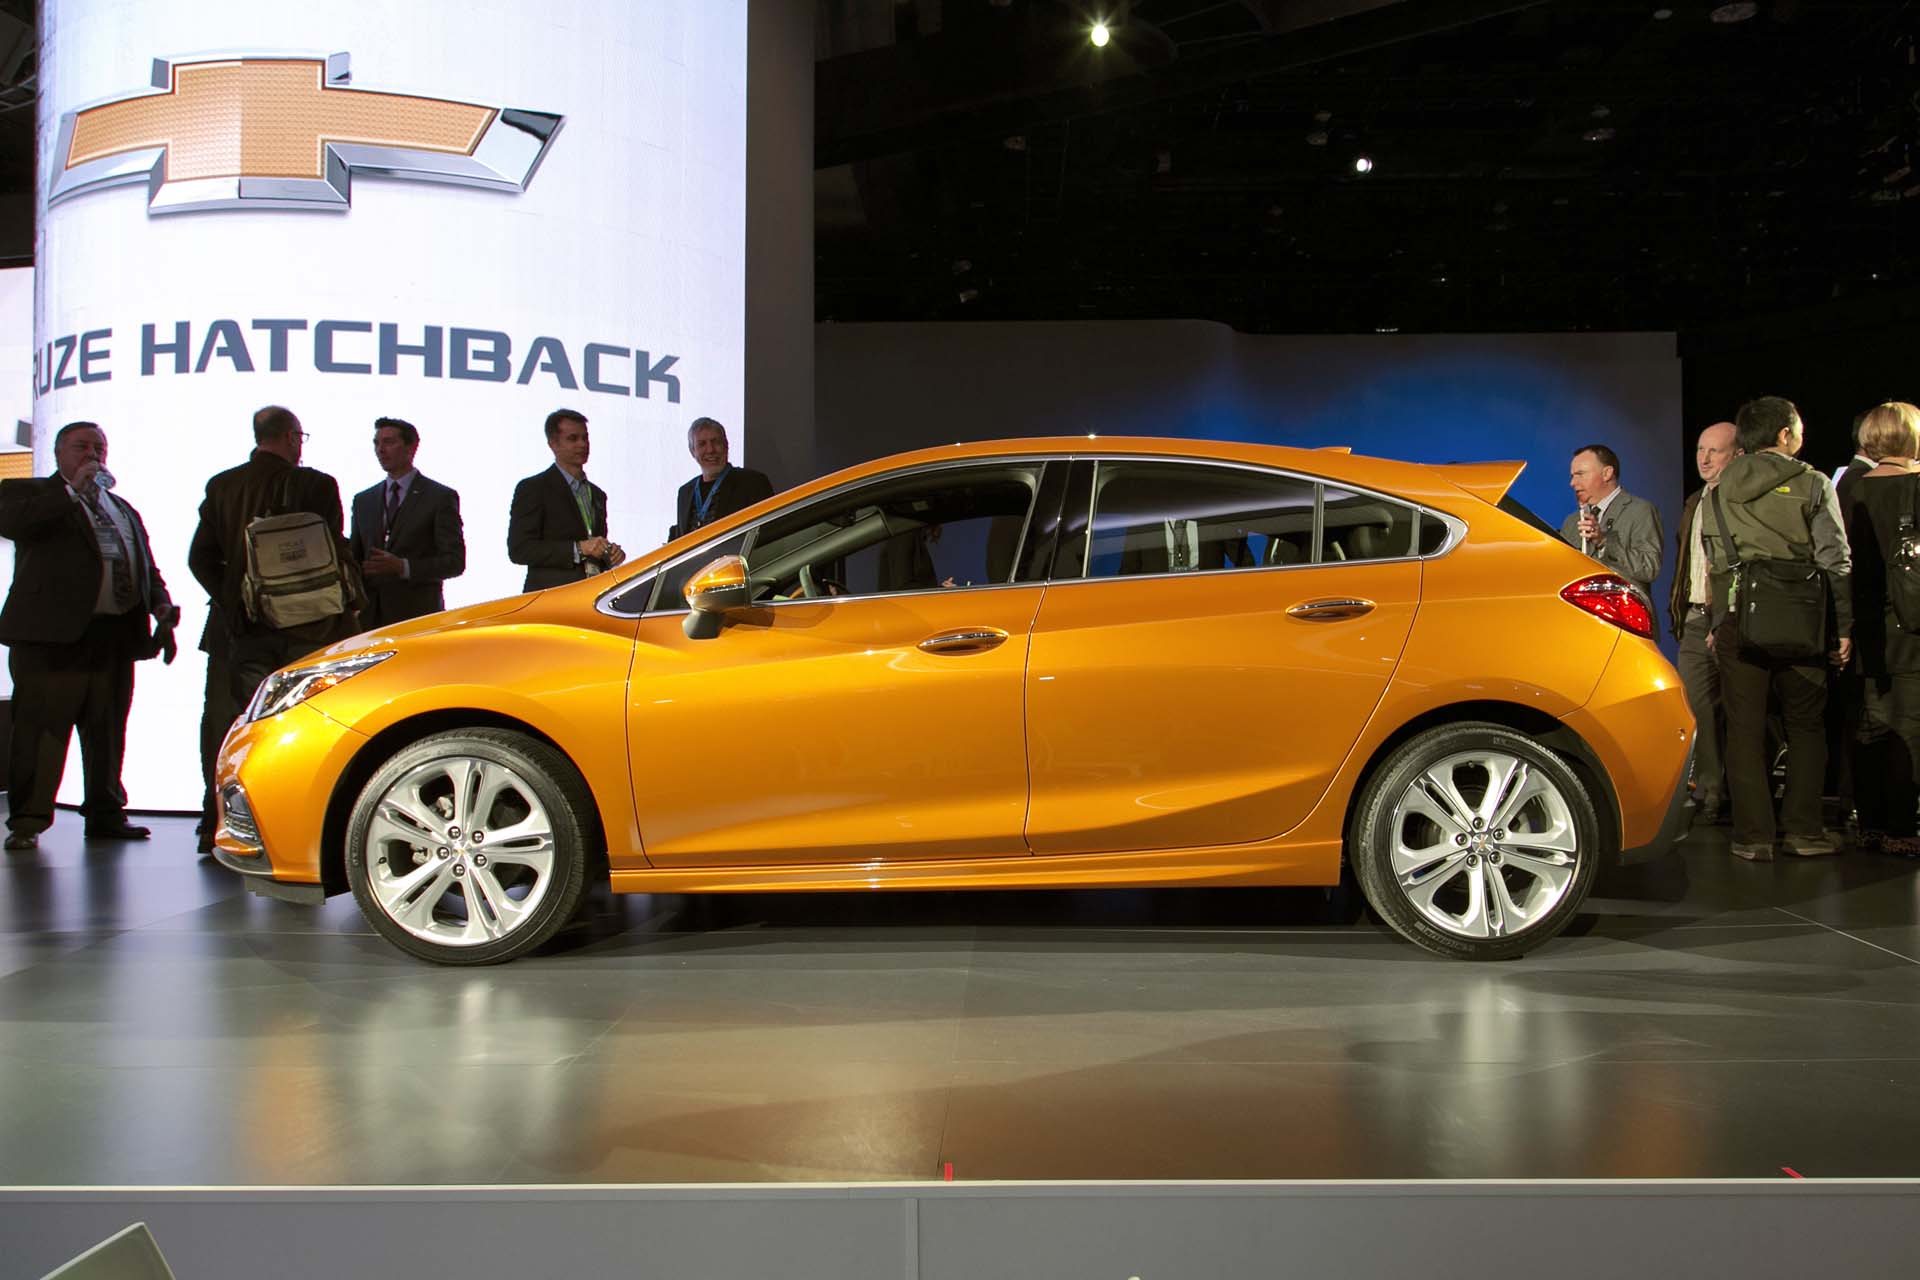 Chevrolet revealed a hatchback variant of its best-selling Cruze, featuring a slew of high-tech gadgetry as well as superior driving dynamics and more rear legroom than its competitors. In addition to a comprehensive suite of driver's aids, the Teen Driver feature promises to support safe techniques for new drivers and can provide parents with data on their child's  driving habits.